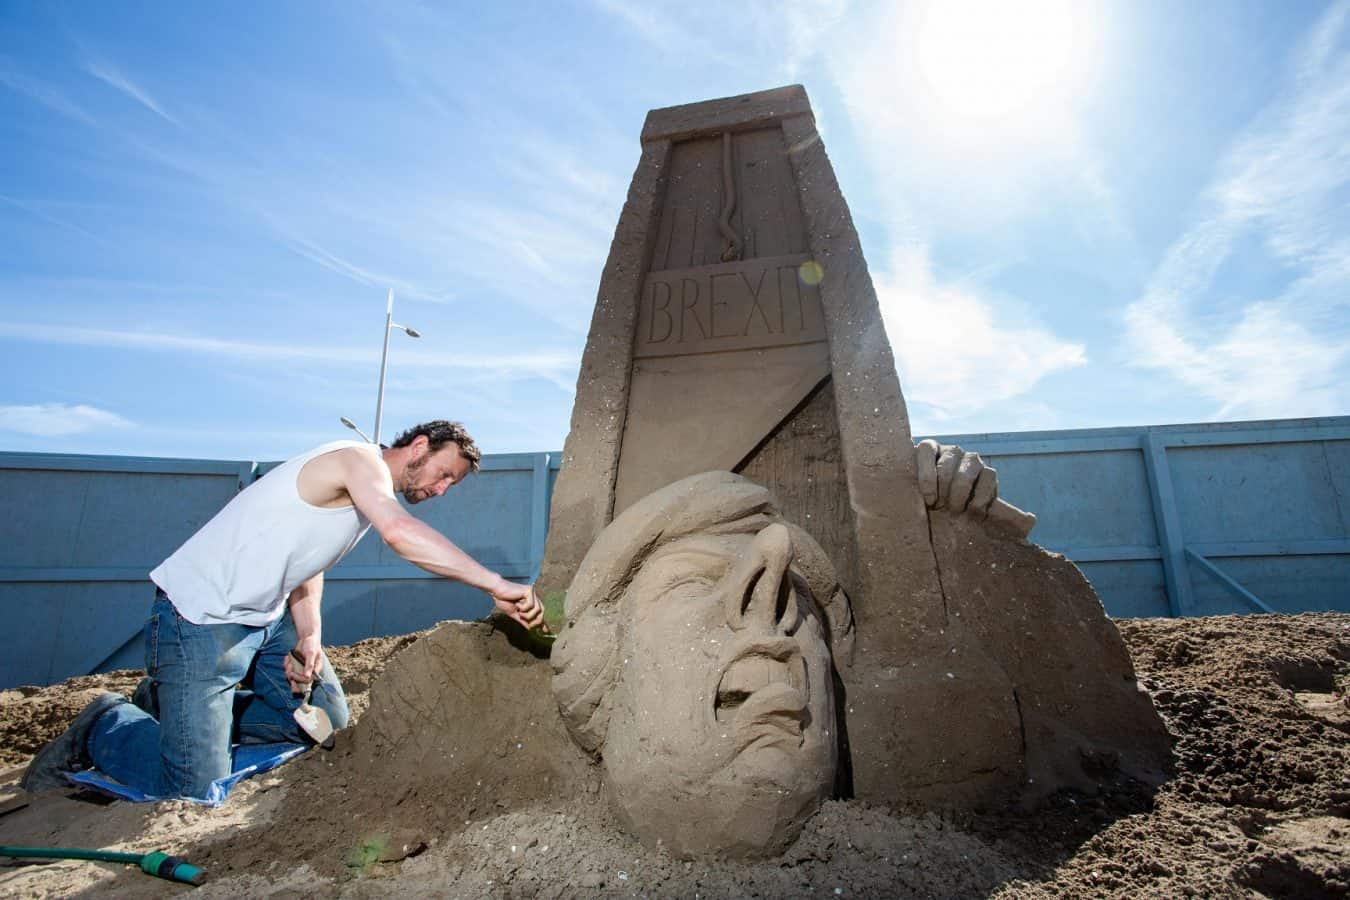 Sand artist creates giant sculpture of Theresa May losing her head ...